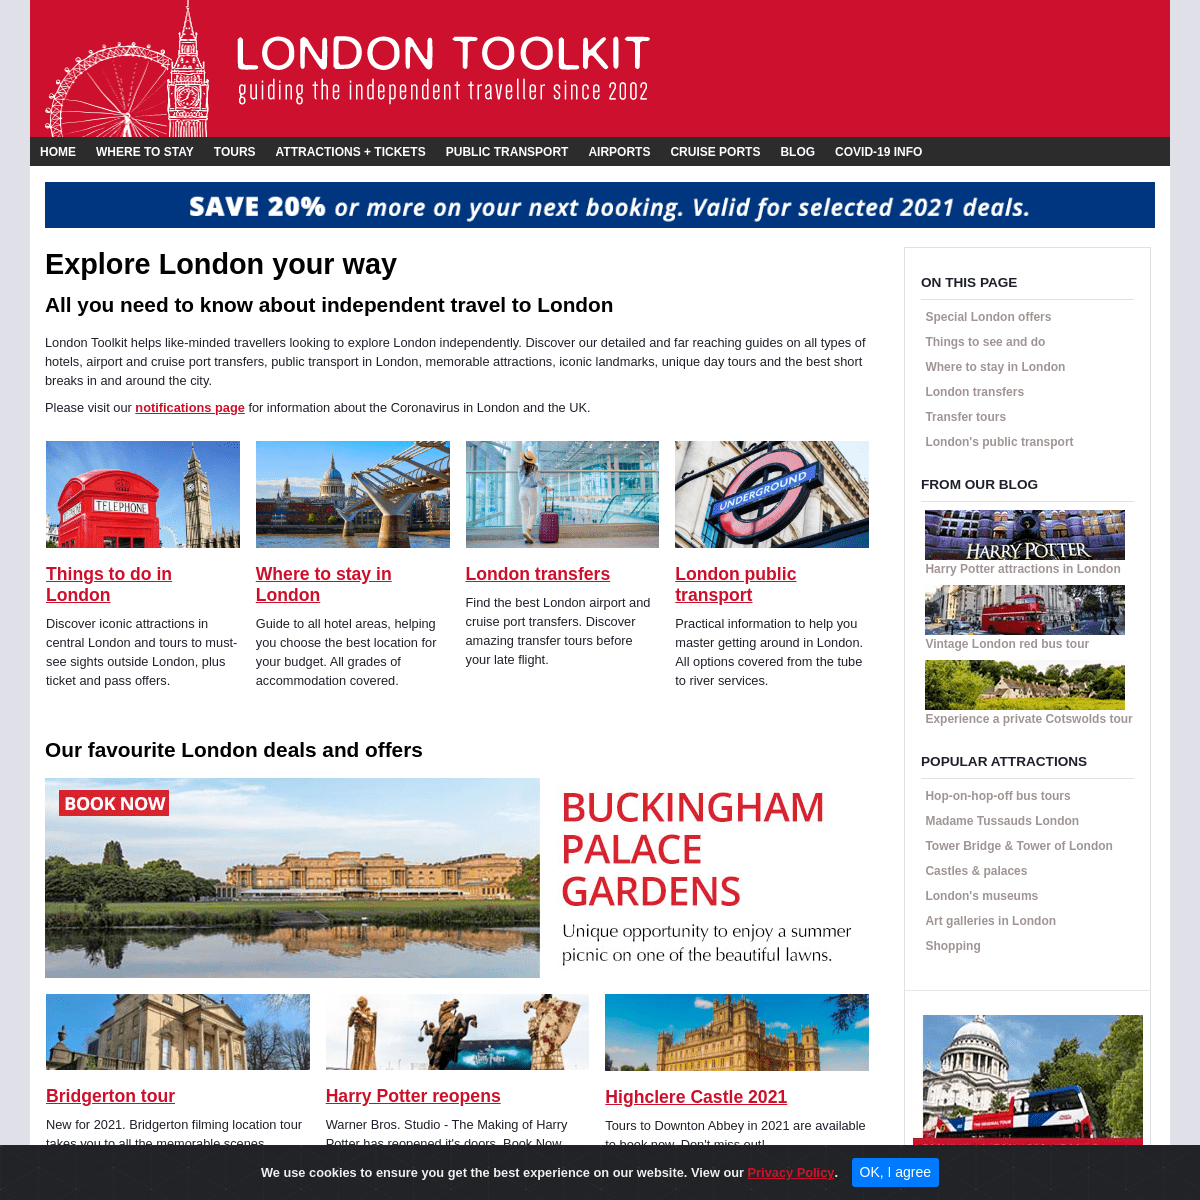 A complete backup of https://londontoolkit.com